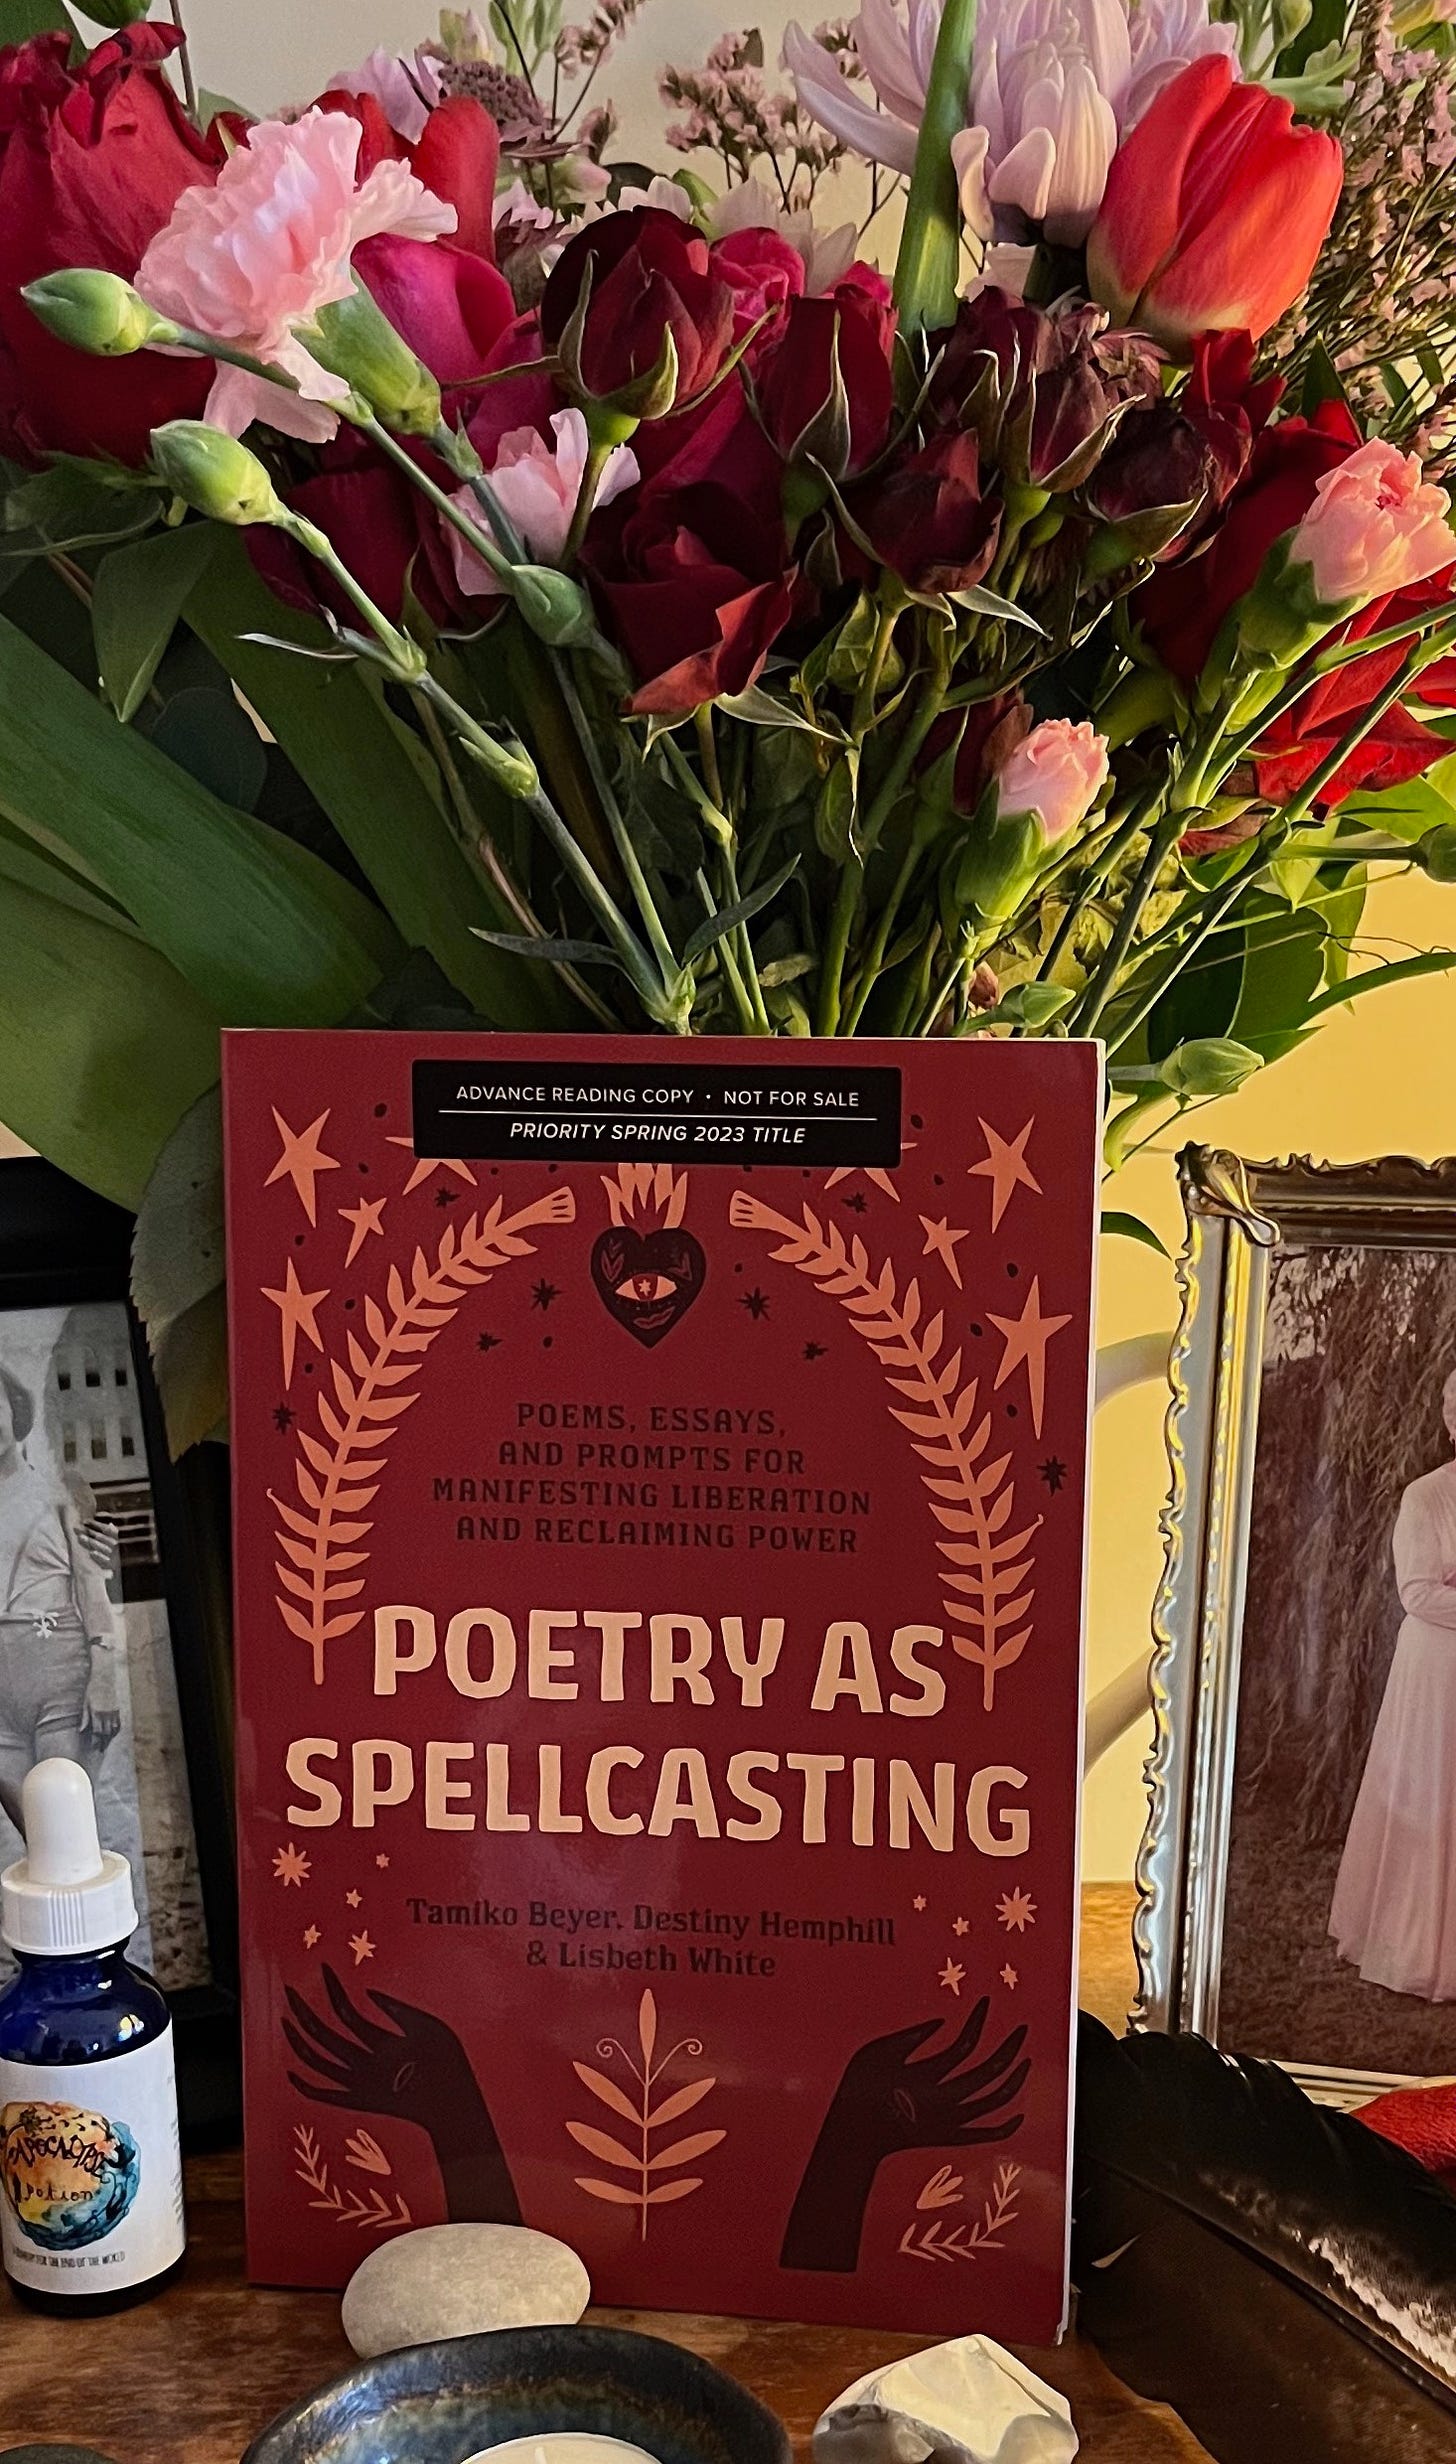 An advanced reading copy of Poetry As Spellcasting is placed on an altar  in front of a bouquet of roses, tulips, chrysanthemums, and carnations. The reds and oranges of the books match the colors of the flowers.